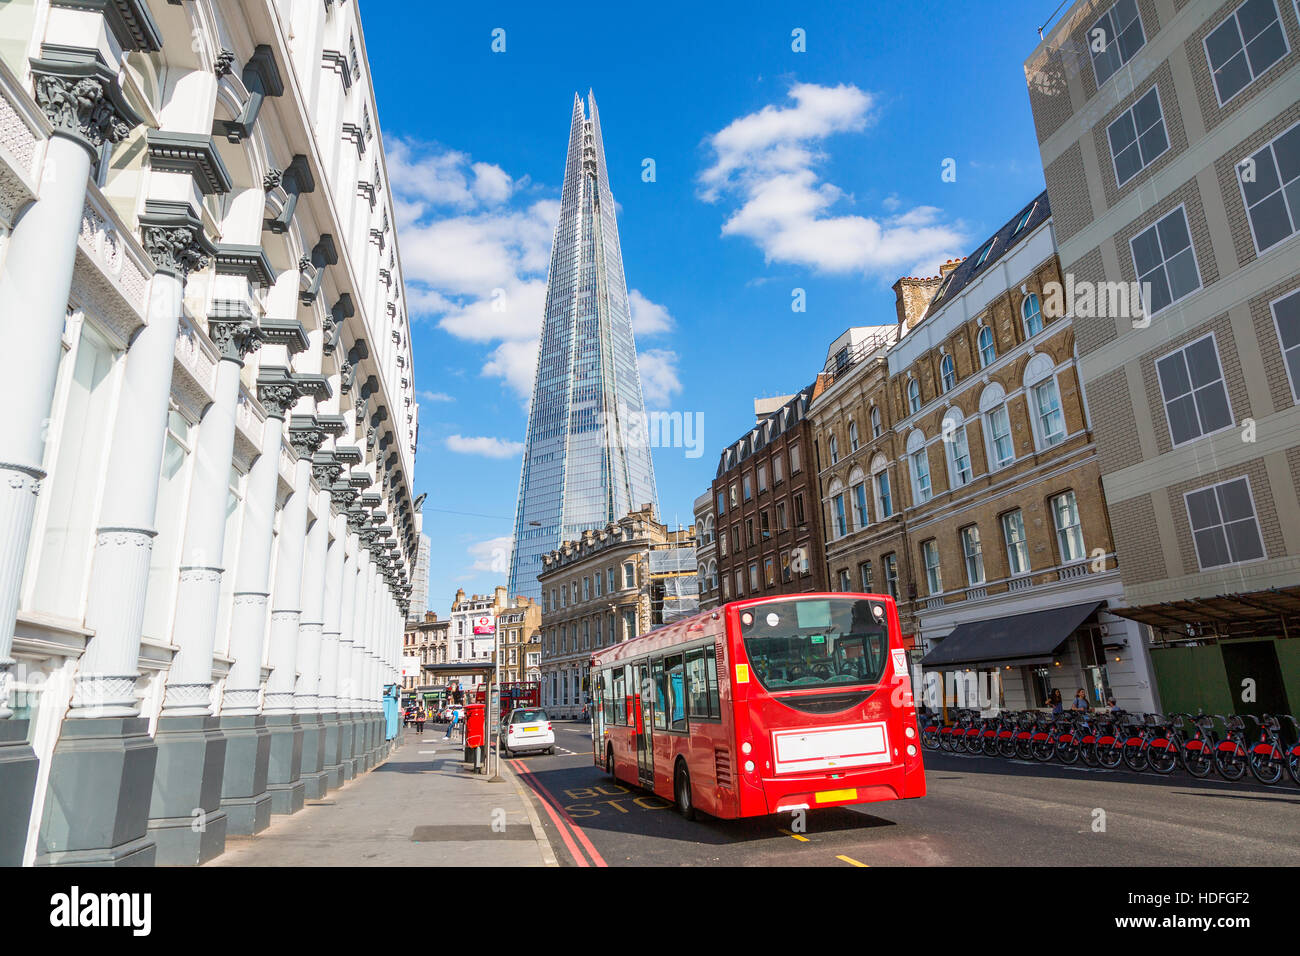 London, Traffic on London with the shard in background Stock Photo